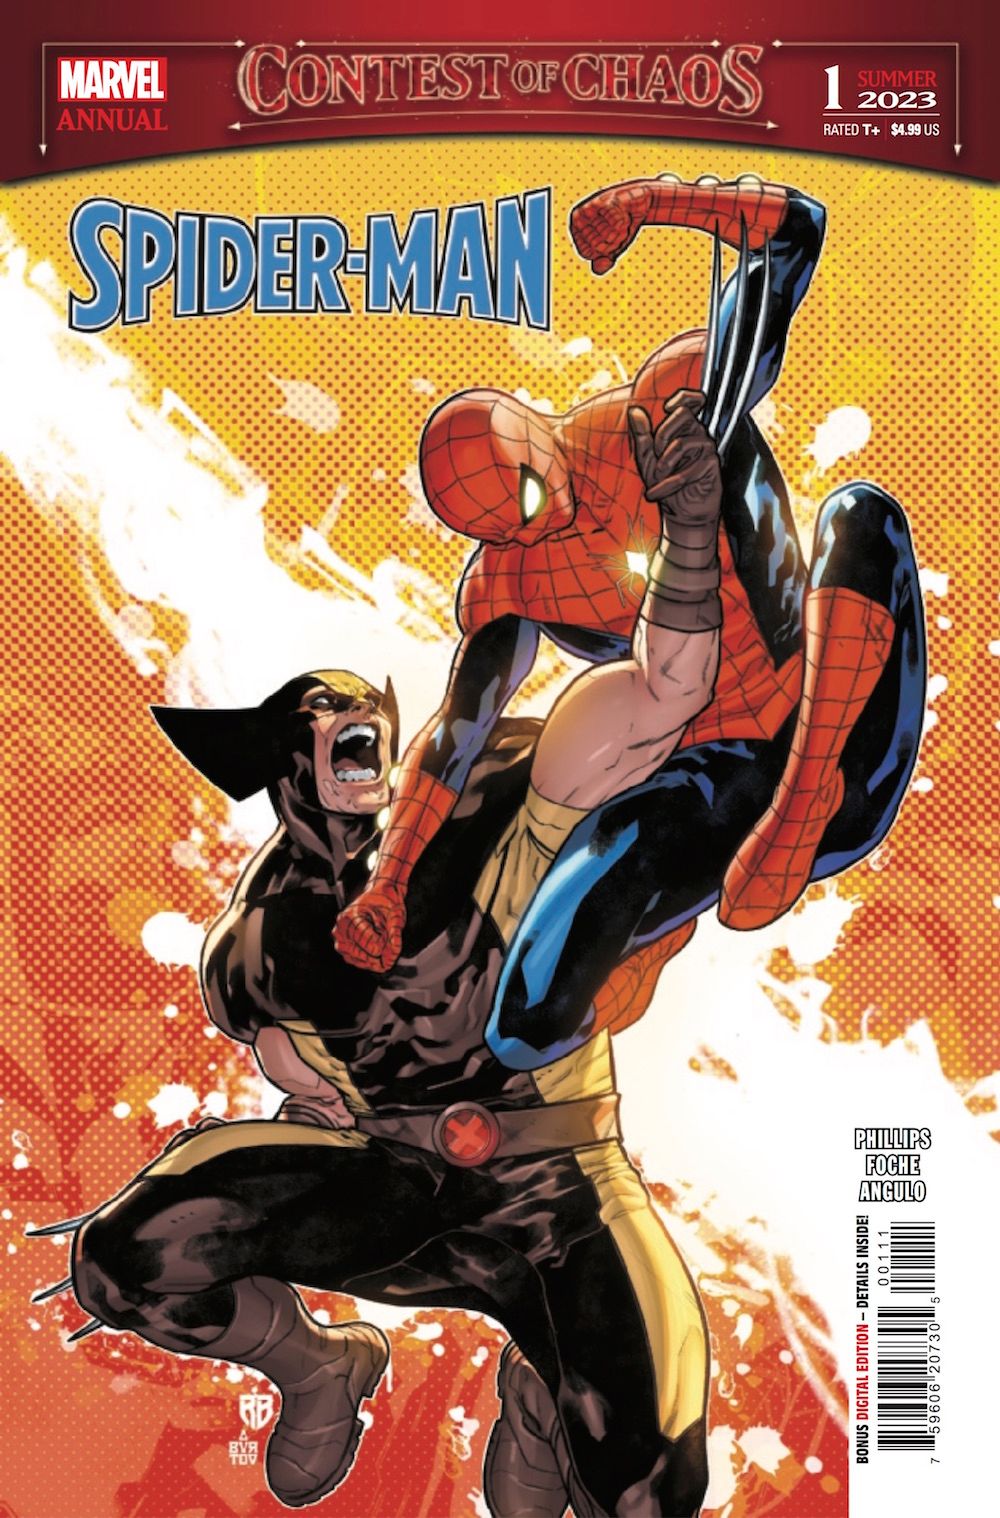 SpiderMan Annual 2023 Review